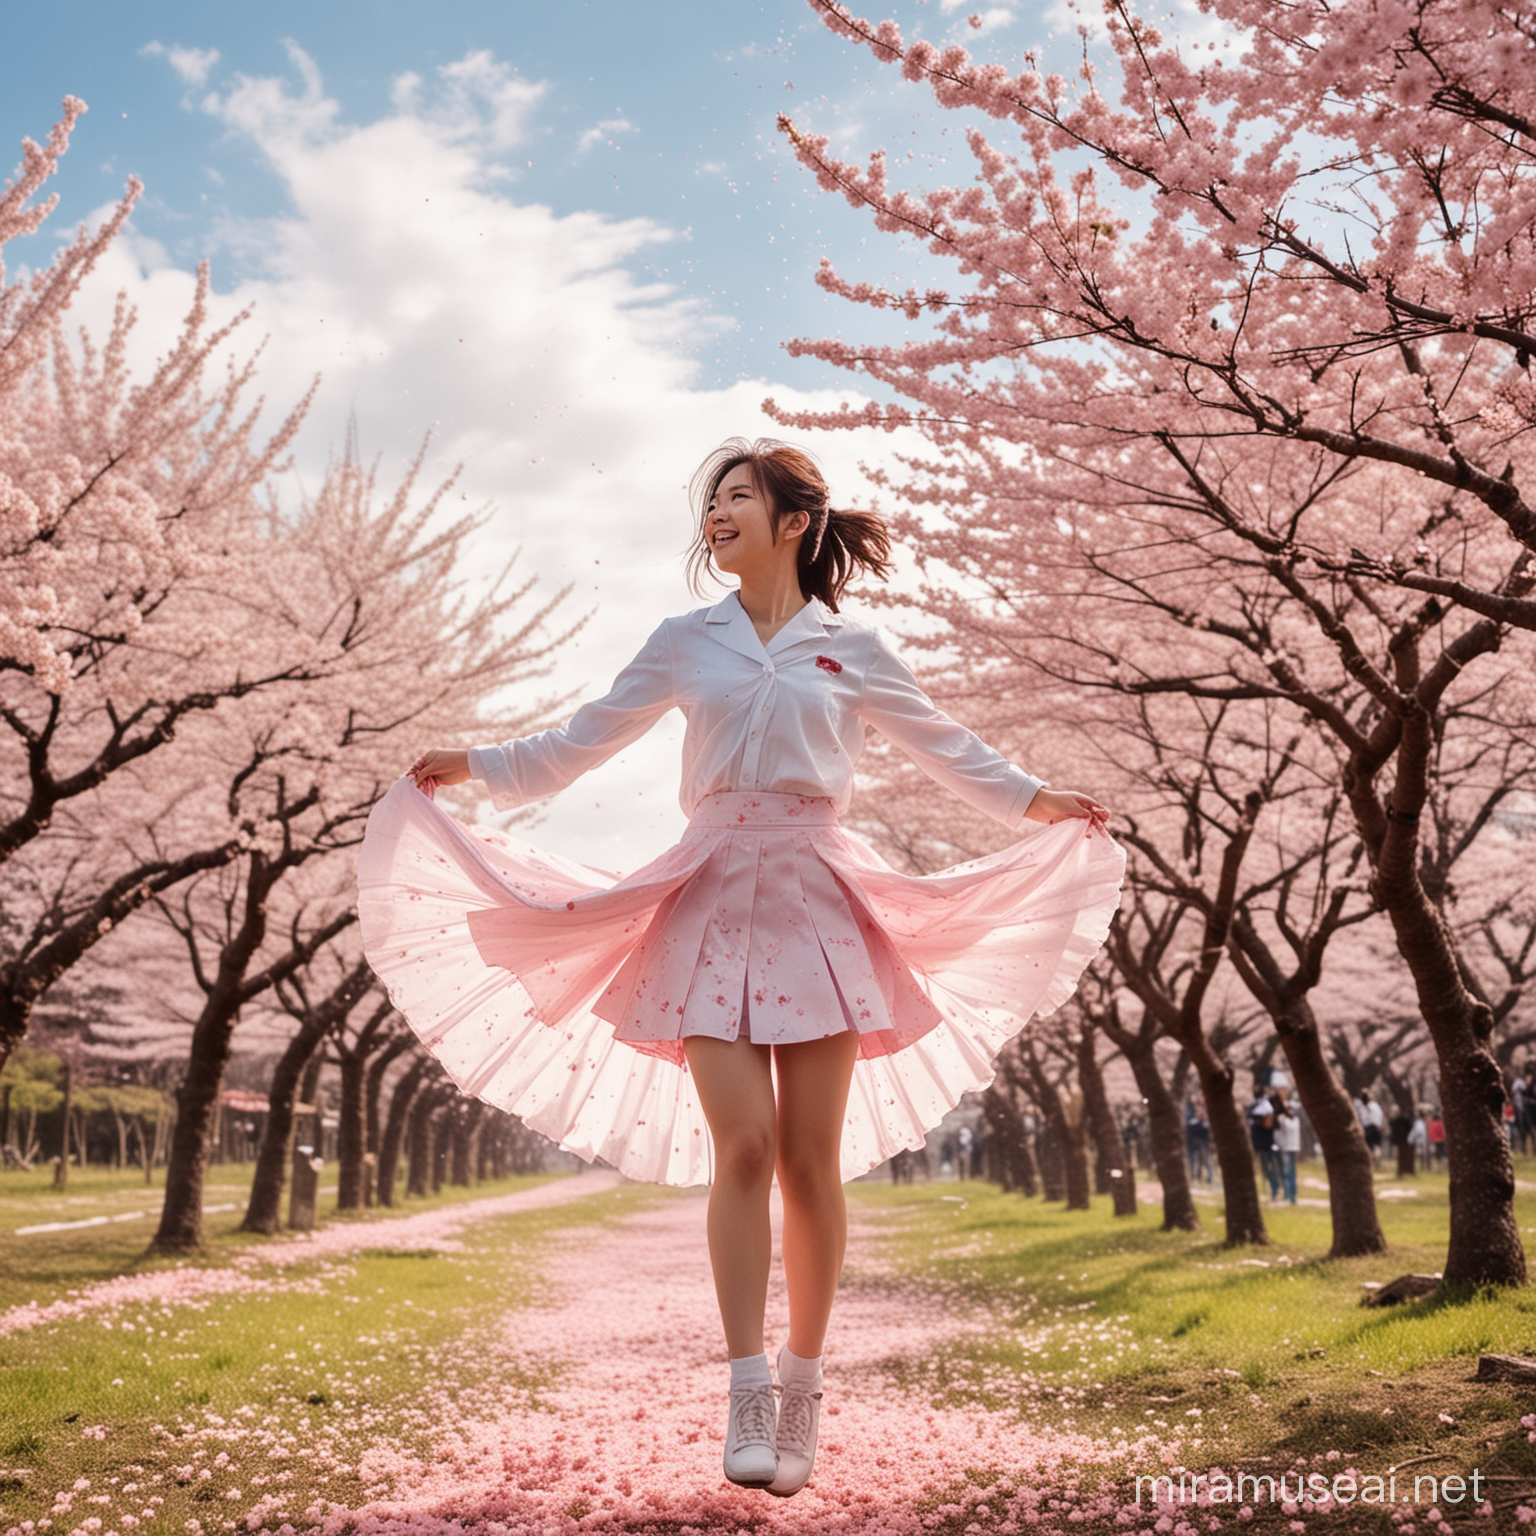 
18 years old, Japanese high school girl lifting her skirt and flying in the sky, spraying pink powder from inside her skirt, row of cherry blossom trees, smiling